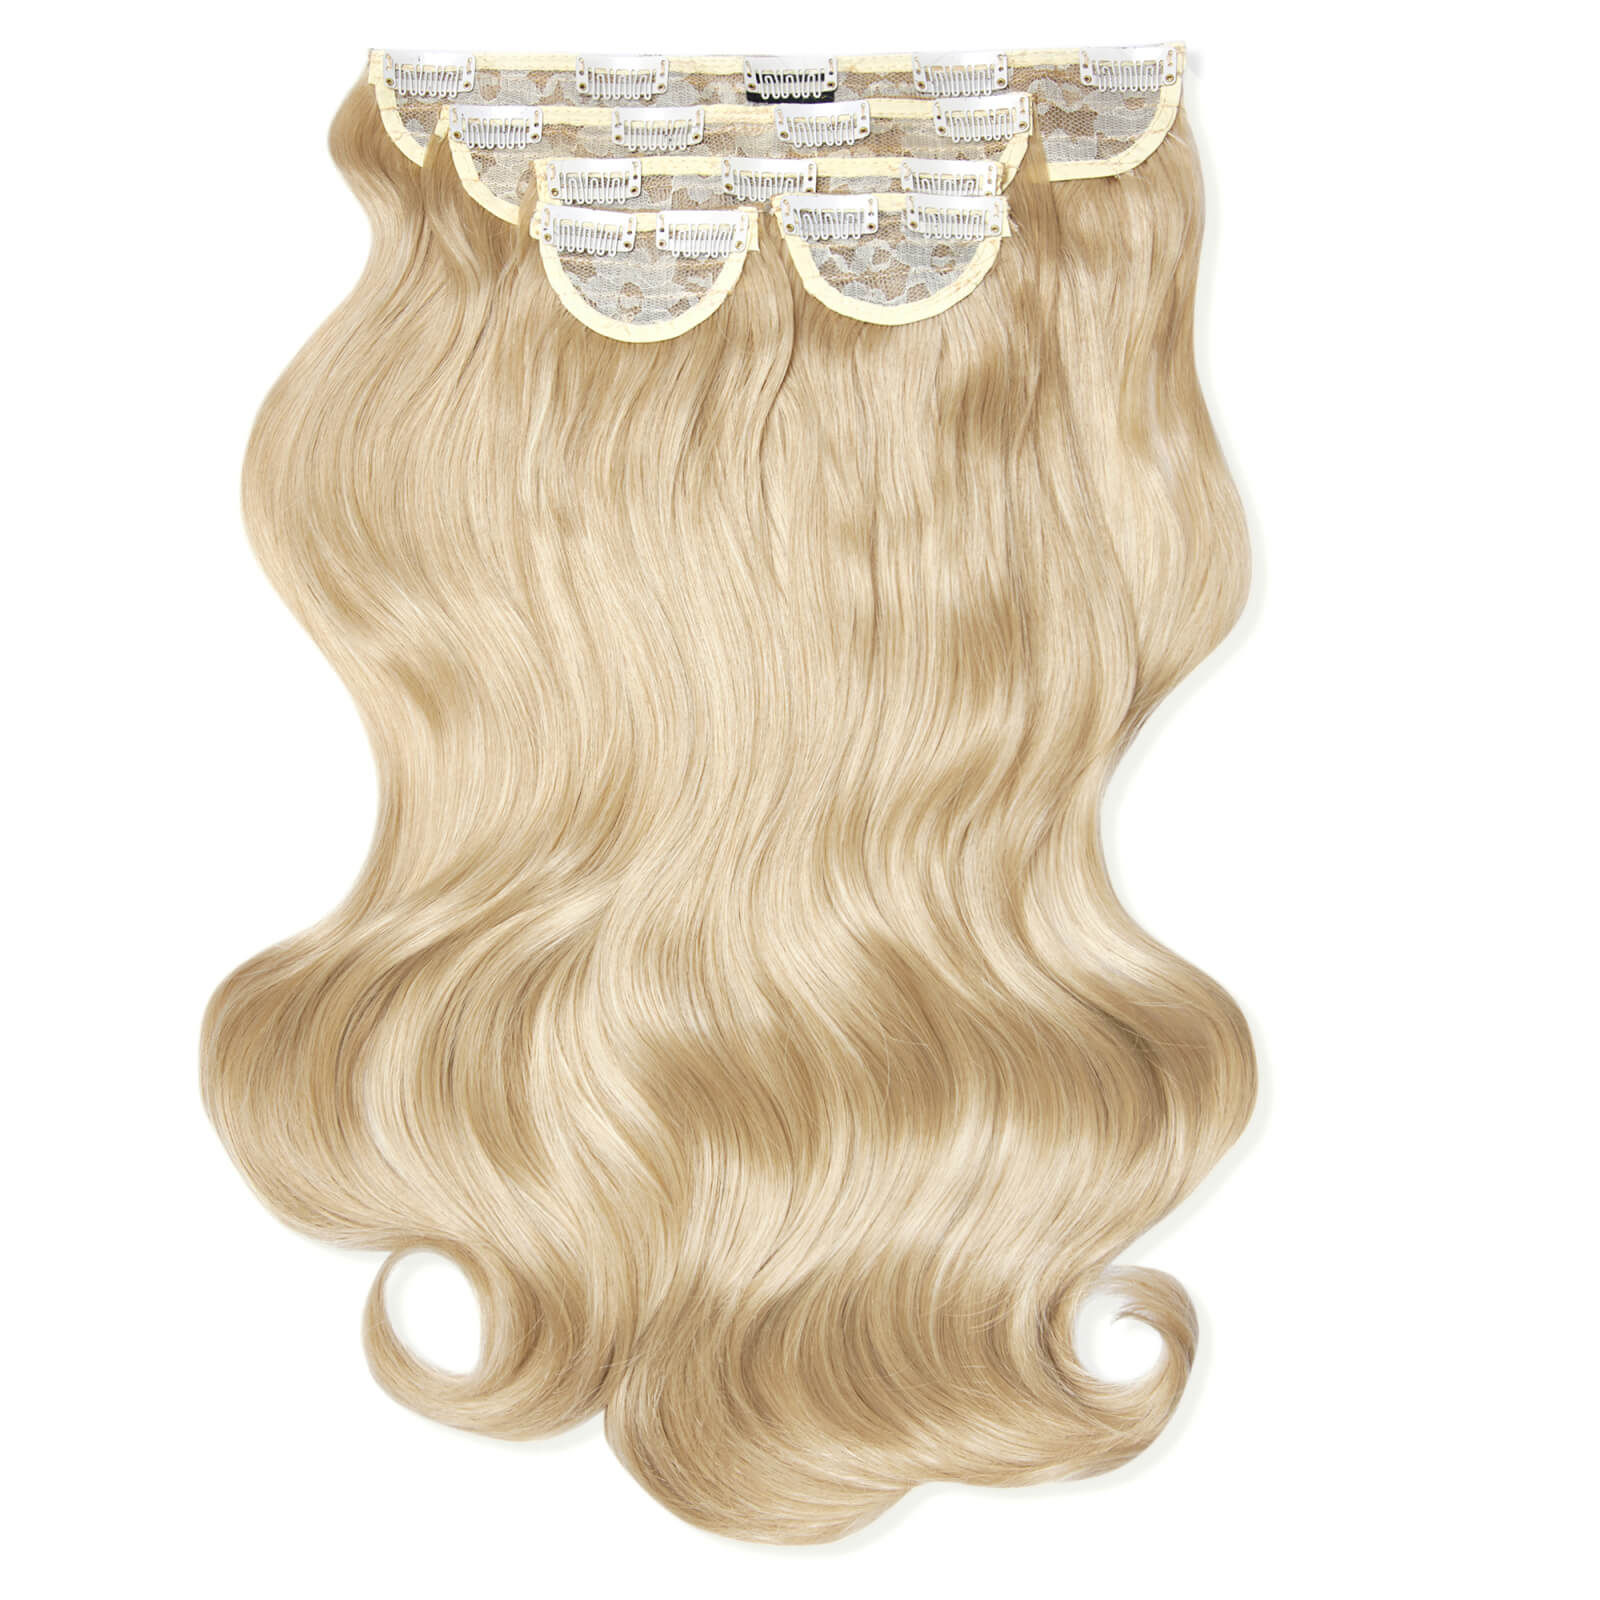 Image of LullaBellz Super Thick 22 5 Piece Natural Wavy Clip In Extensions (Various Shades) - Light Blonde